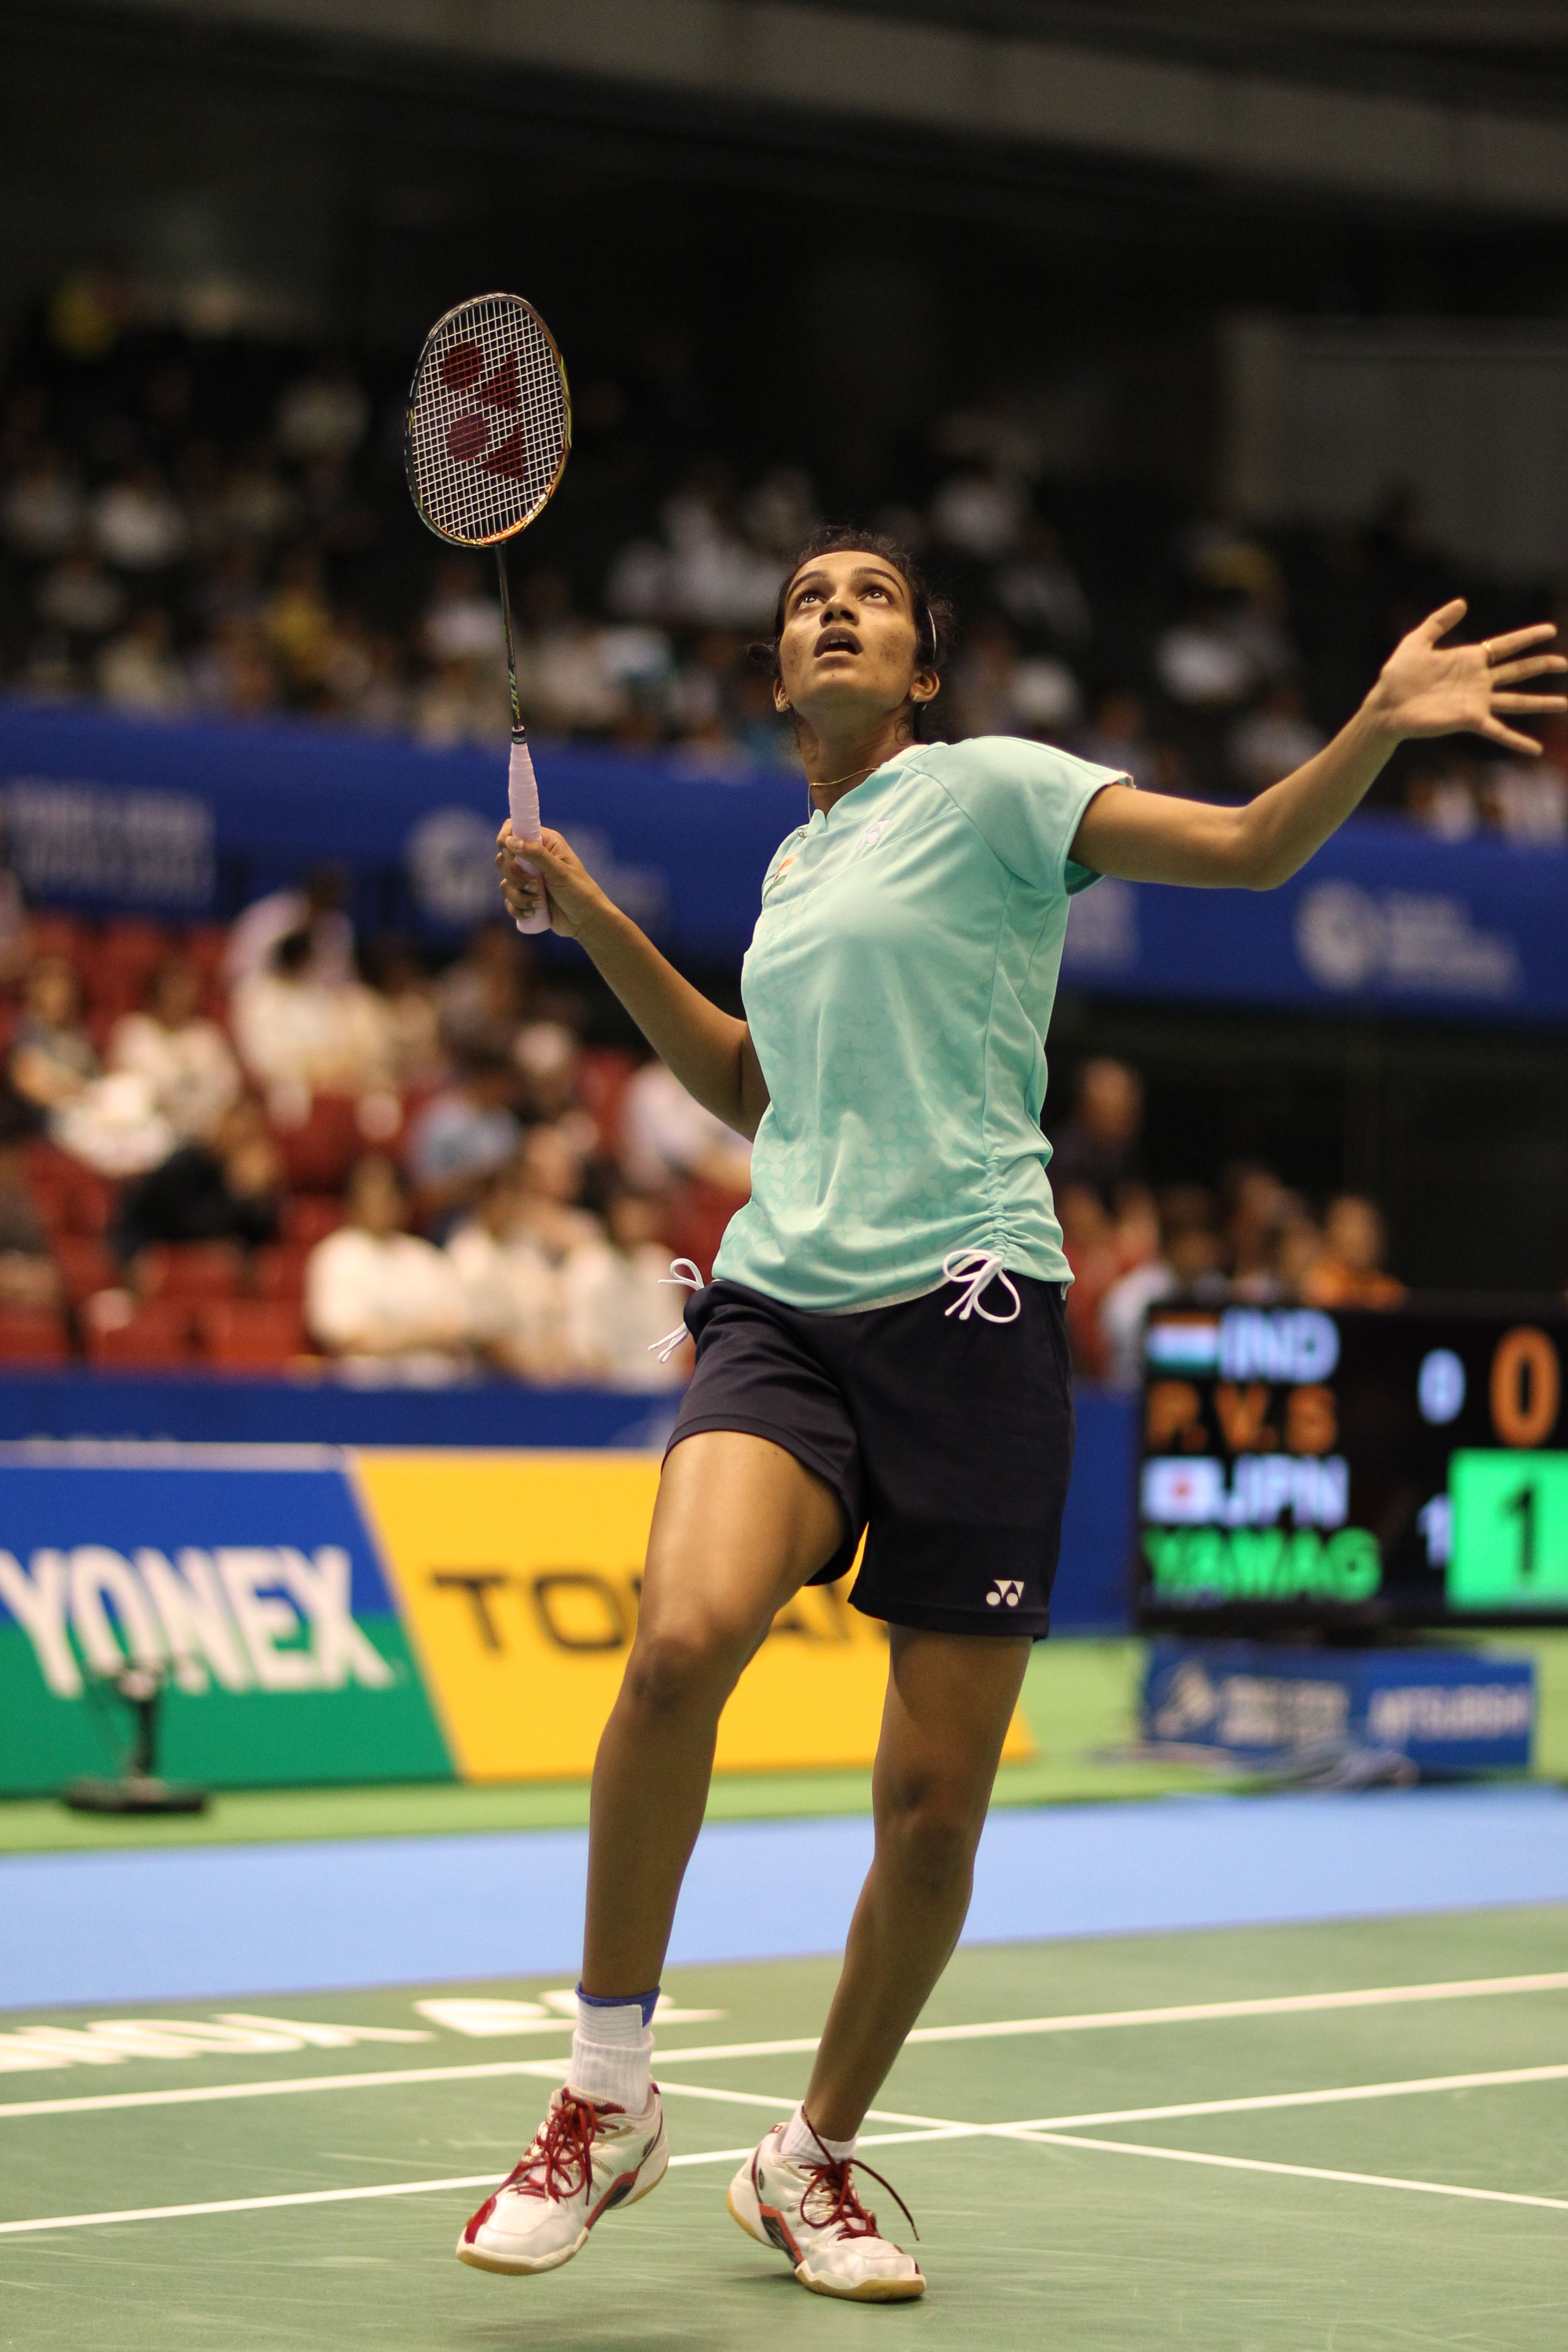 Sindhu P.V. (NANORAY 700RP) competes in the YONEX OPEN JAPAN 2013